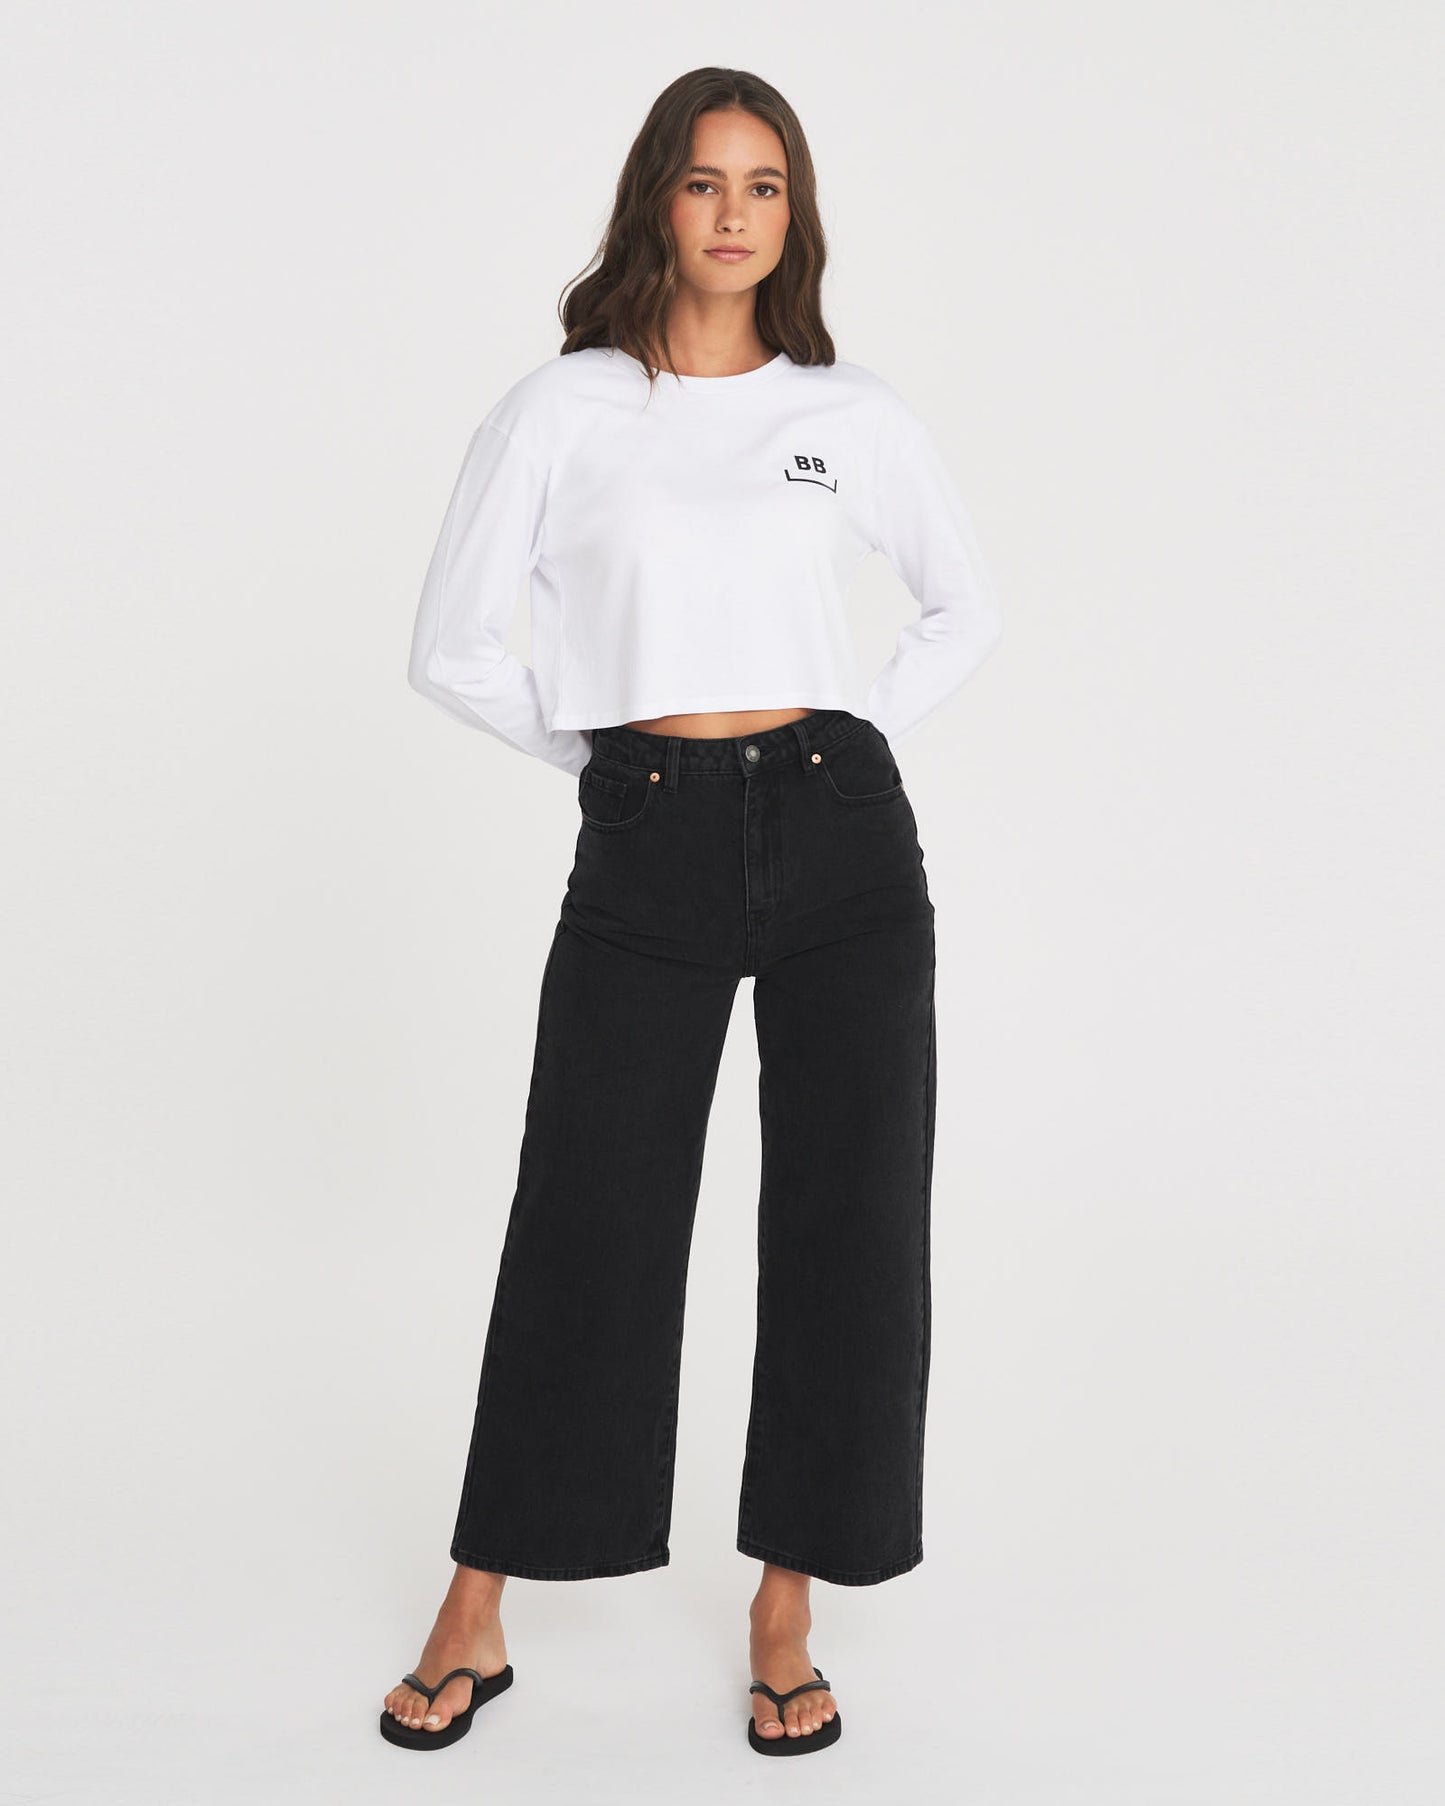 Byron Bay Surfboards Cropped Long Sleeve T-Shirt